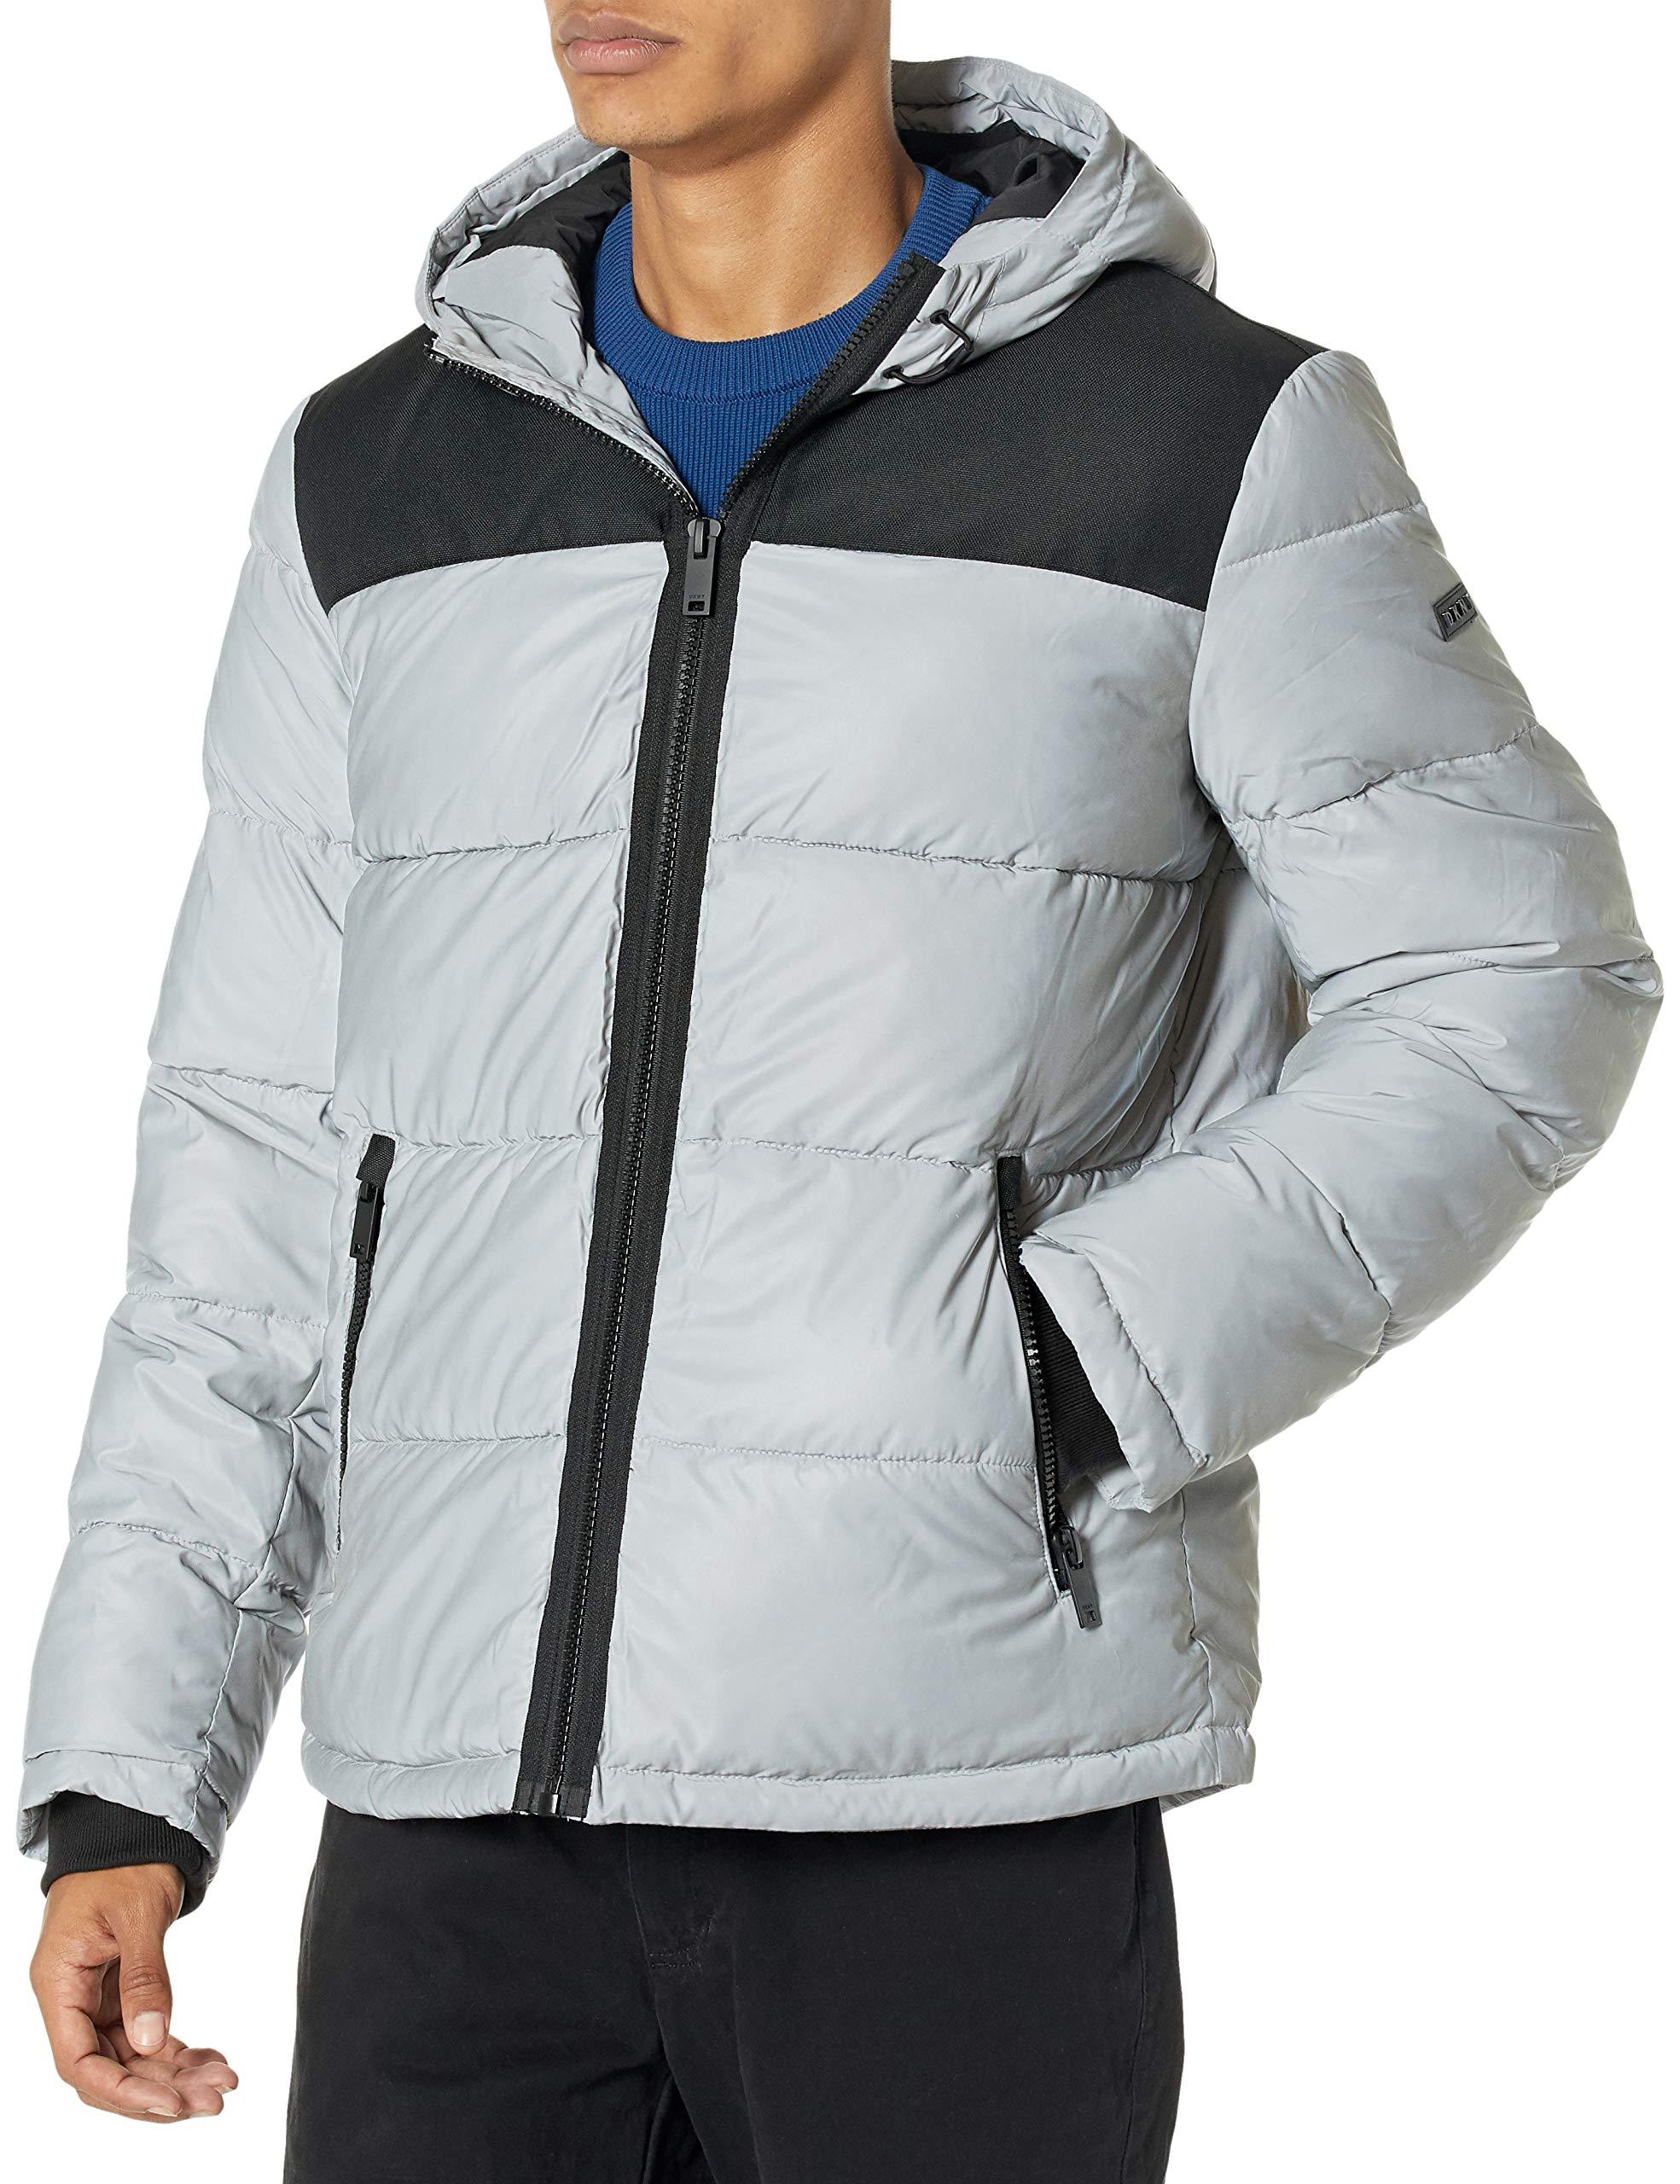 DKNY Synthetic Shawn Quilted Mixed Media Hooded Puffer Jacket in Silver  (Metallic) for Men - Save 14% - Lyst